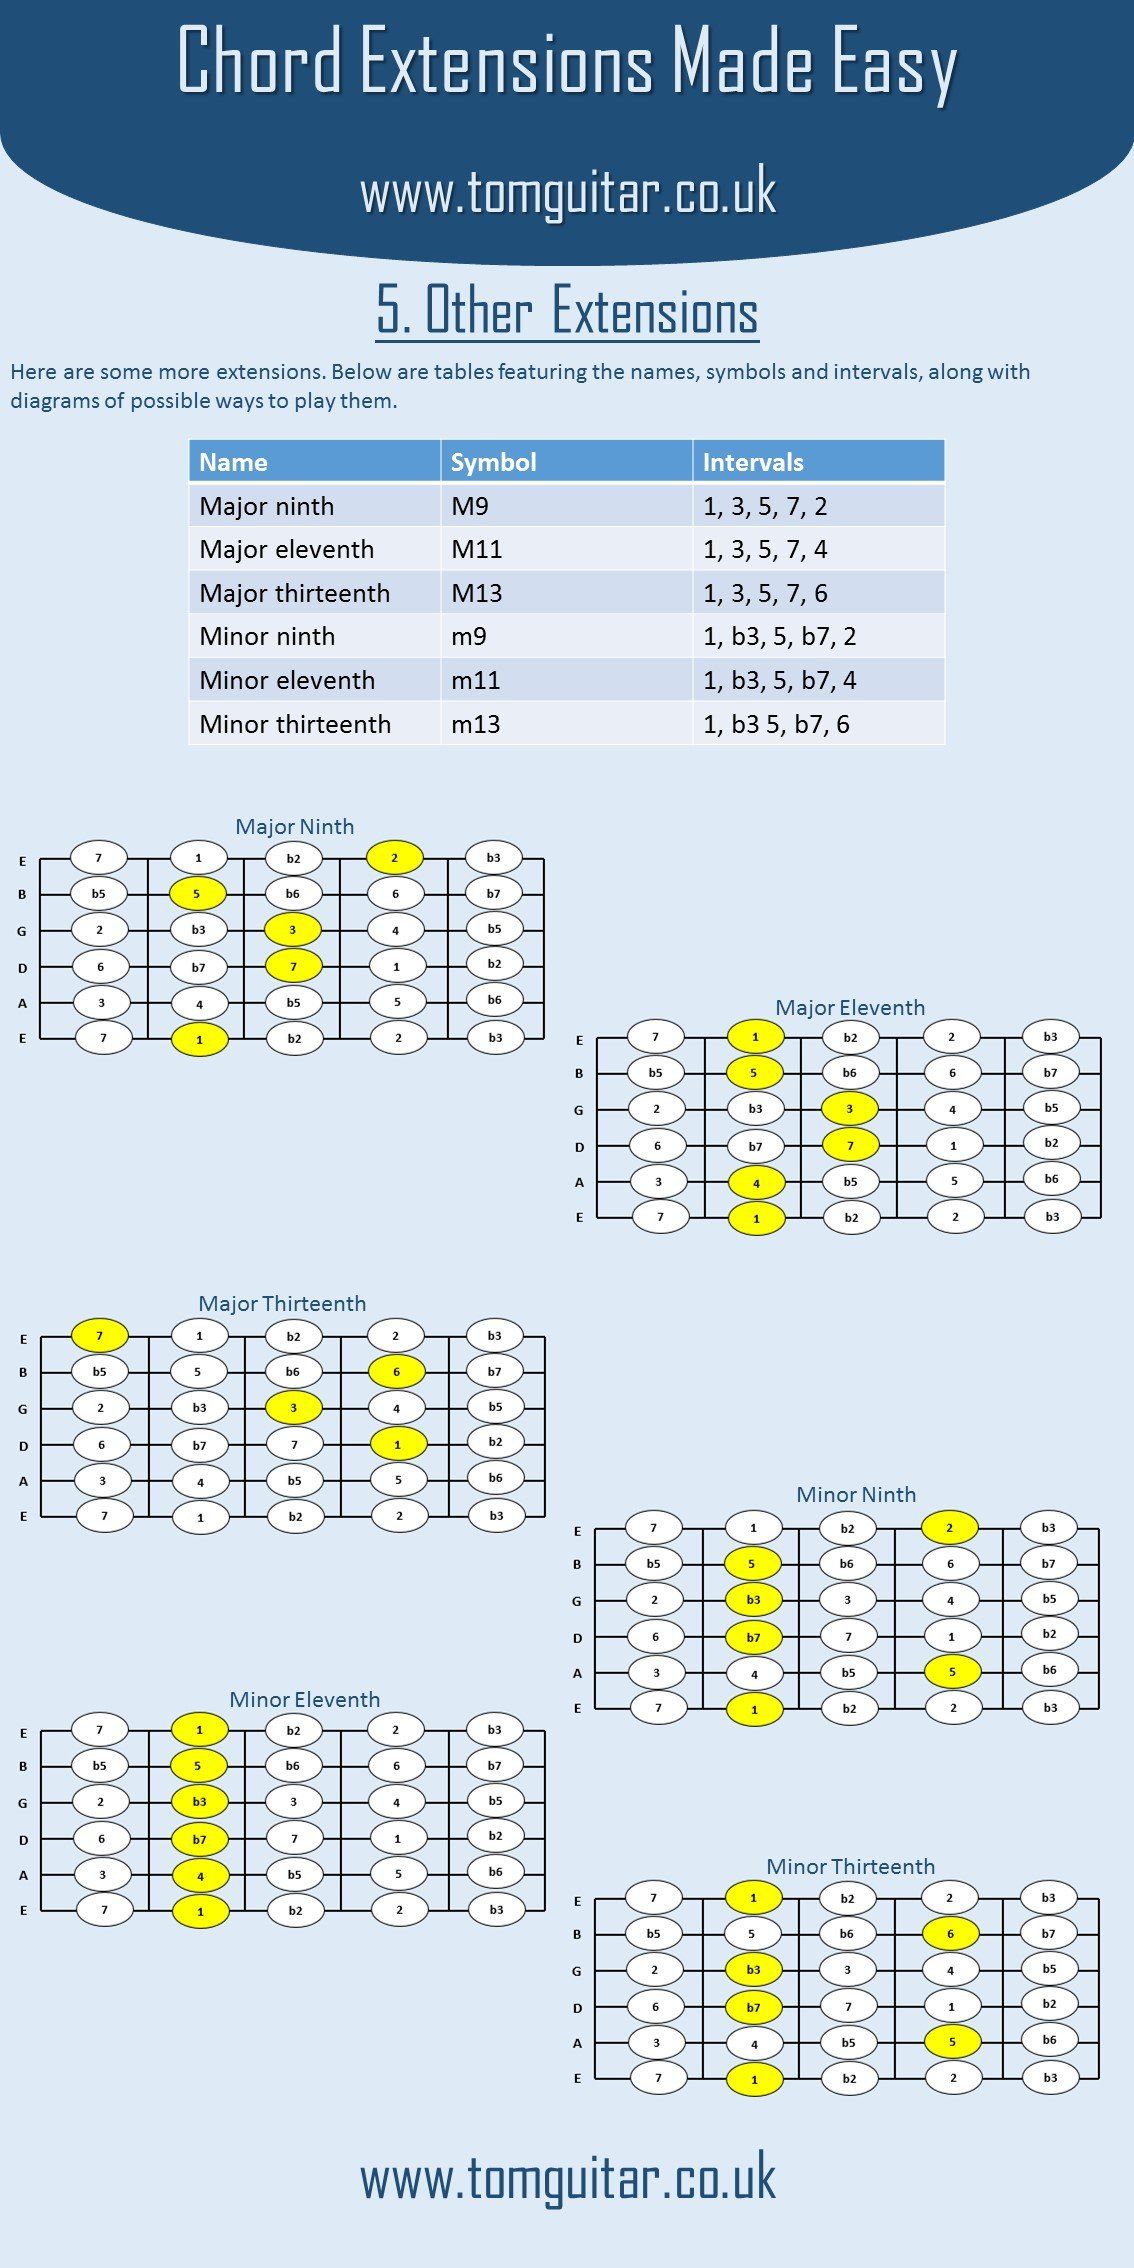 Chord Extensions Made Easy - Major and Minor 9th, 11th and 13th chords